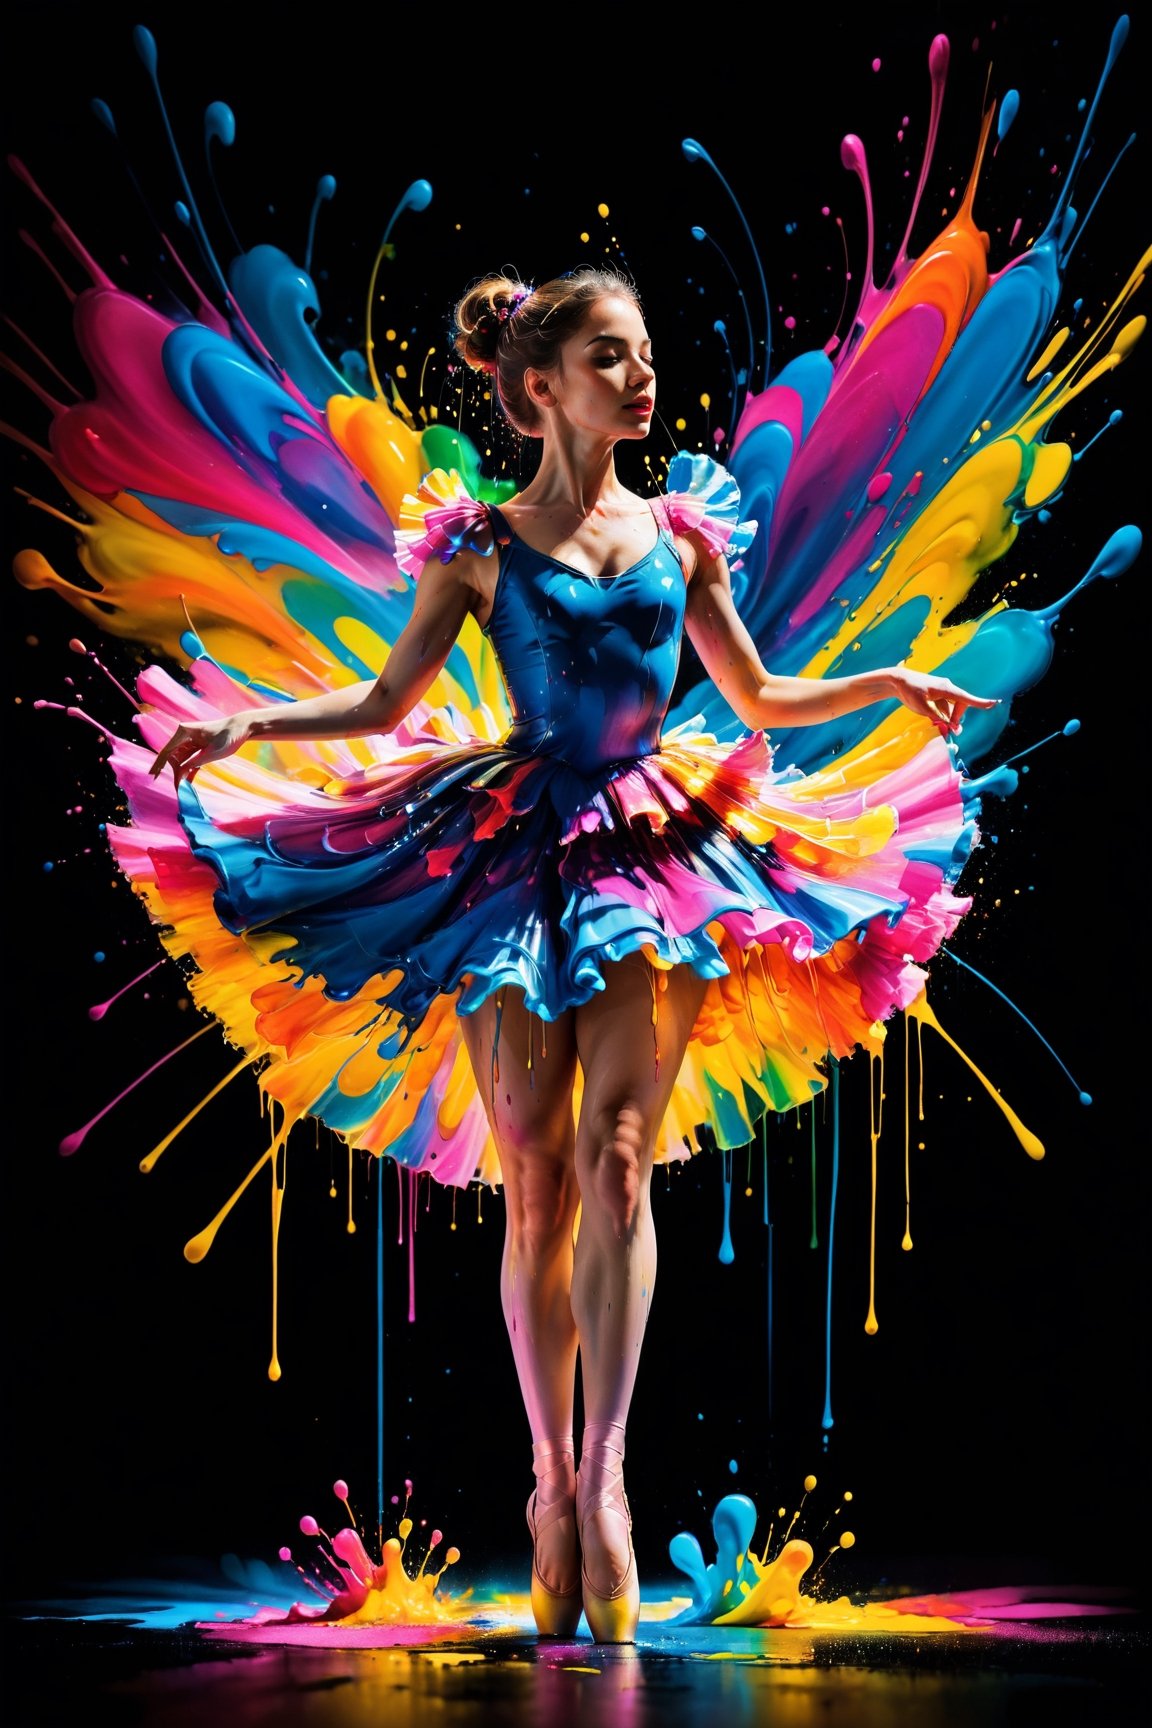 ColorART, Vibrant, dynamic, and colourful portrait photography featuring paint splashes. dripping paint, High-speed shutter, speedlight flash, long exposure. Blended light, artistic composition, amazing OHWX dressed as a ballerina, High-quality, ultra high-resolution image,